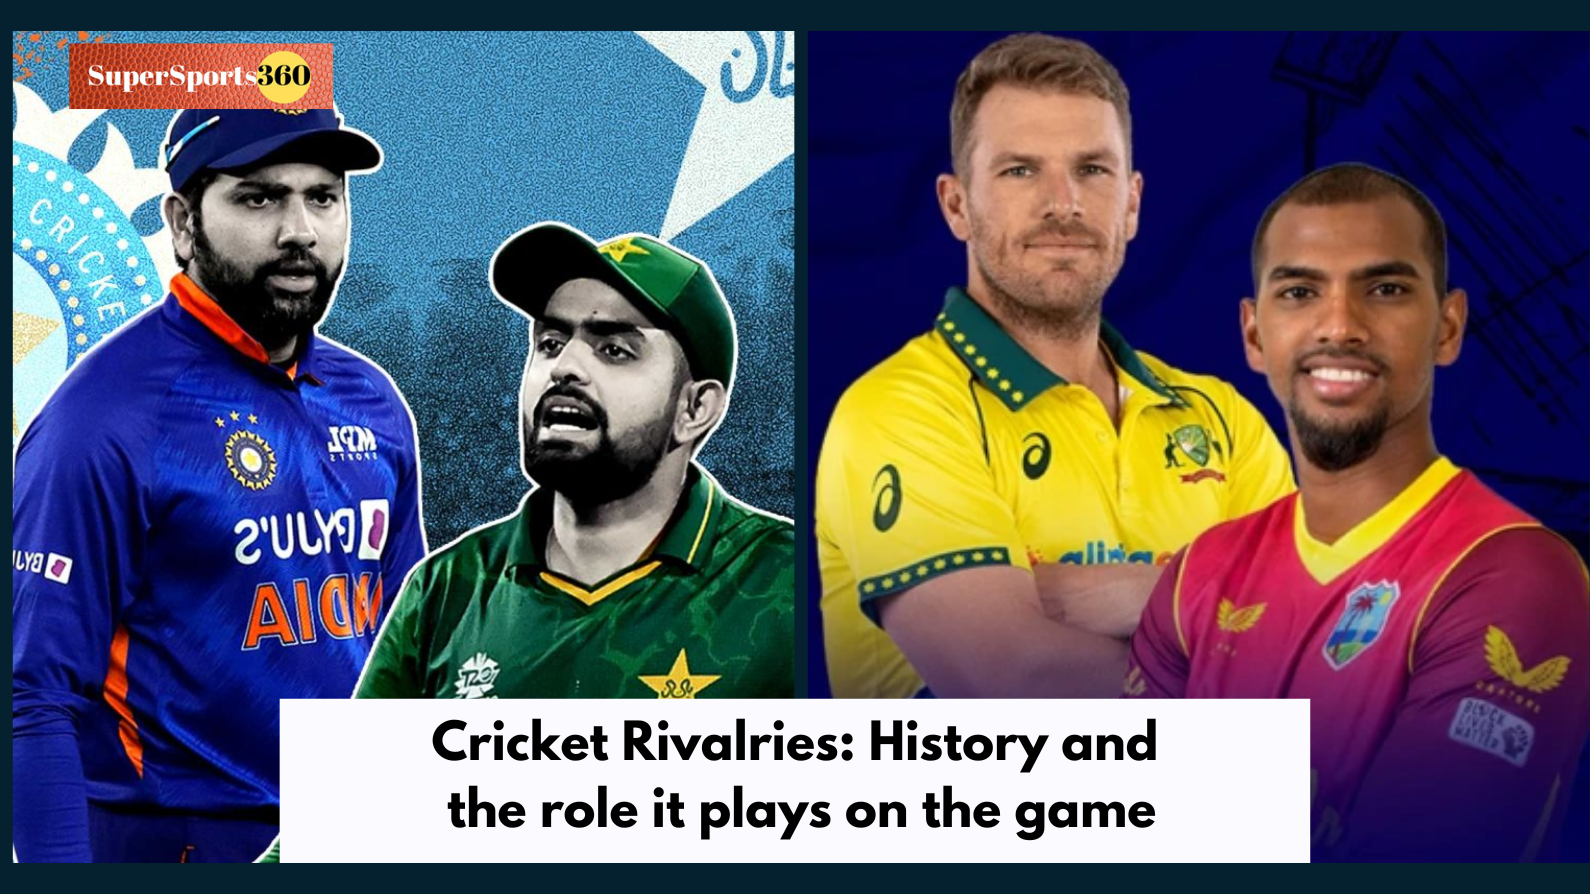 Cricket Rivalries: History and the role it plays on the game